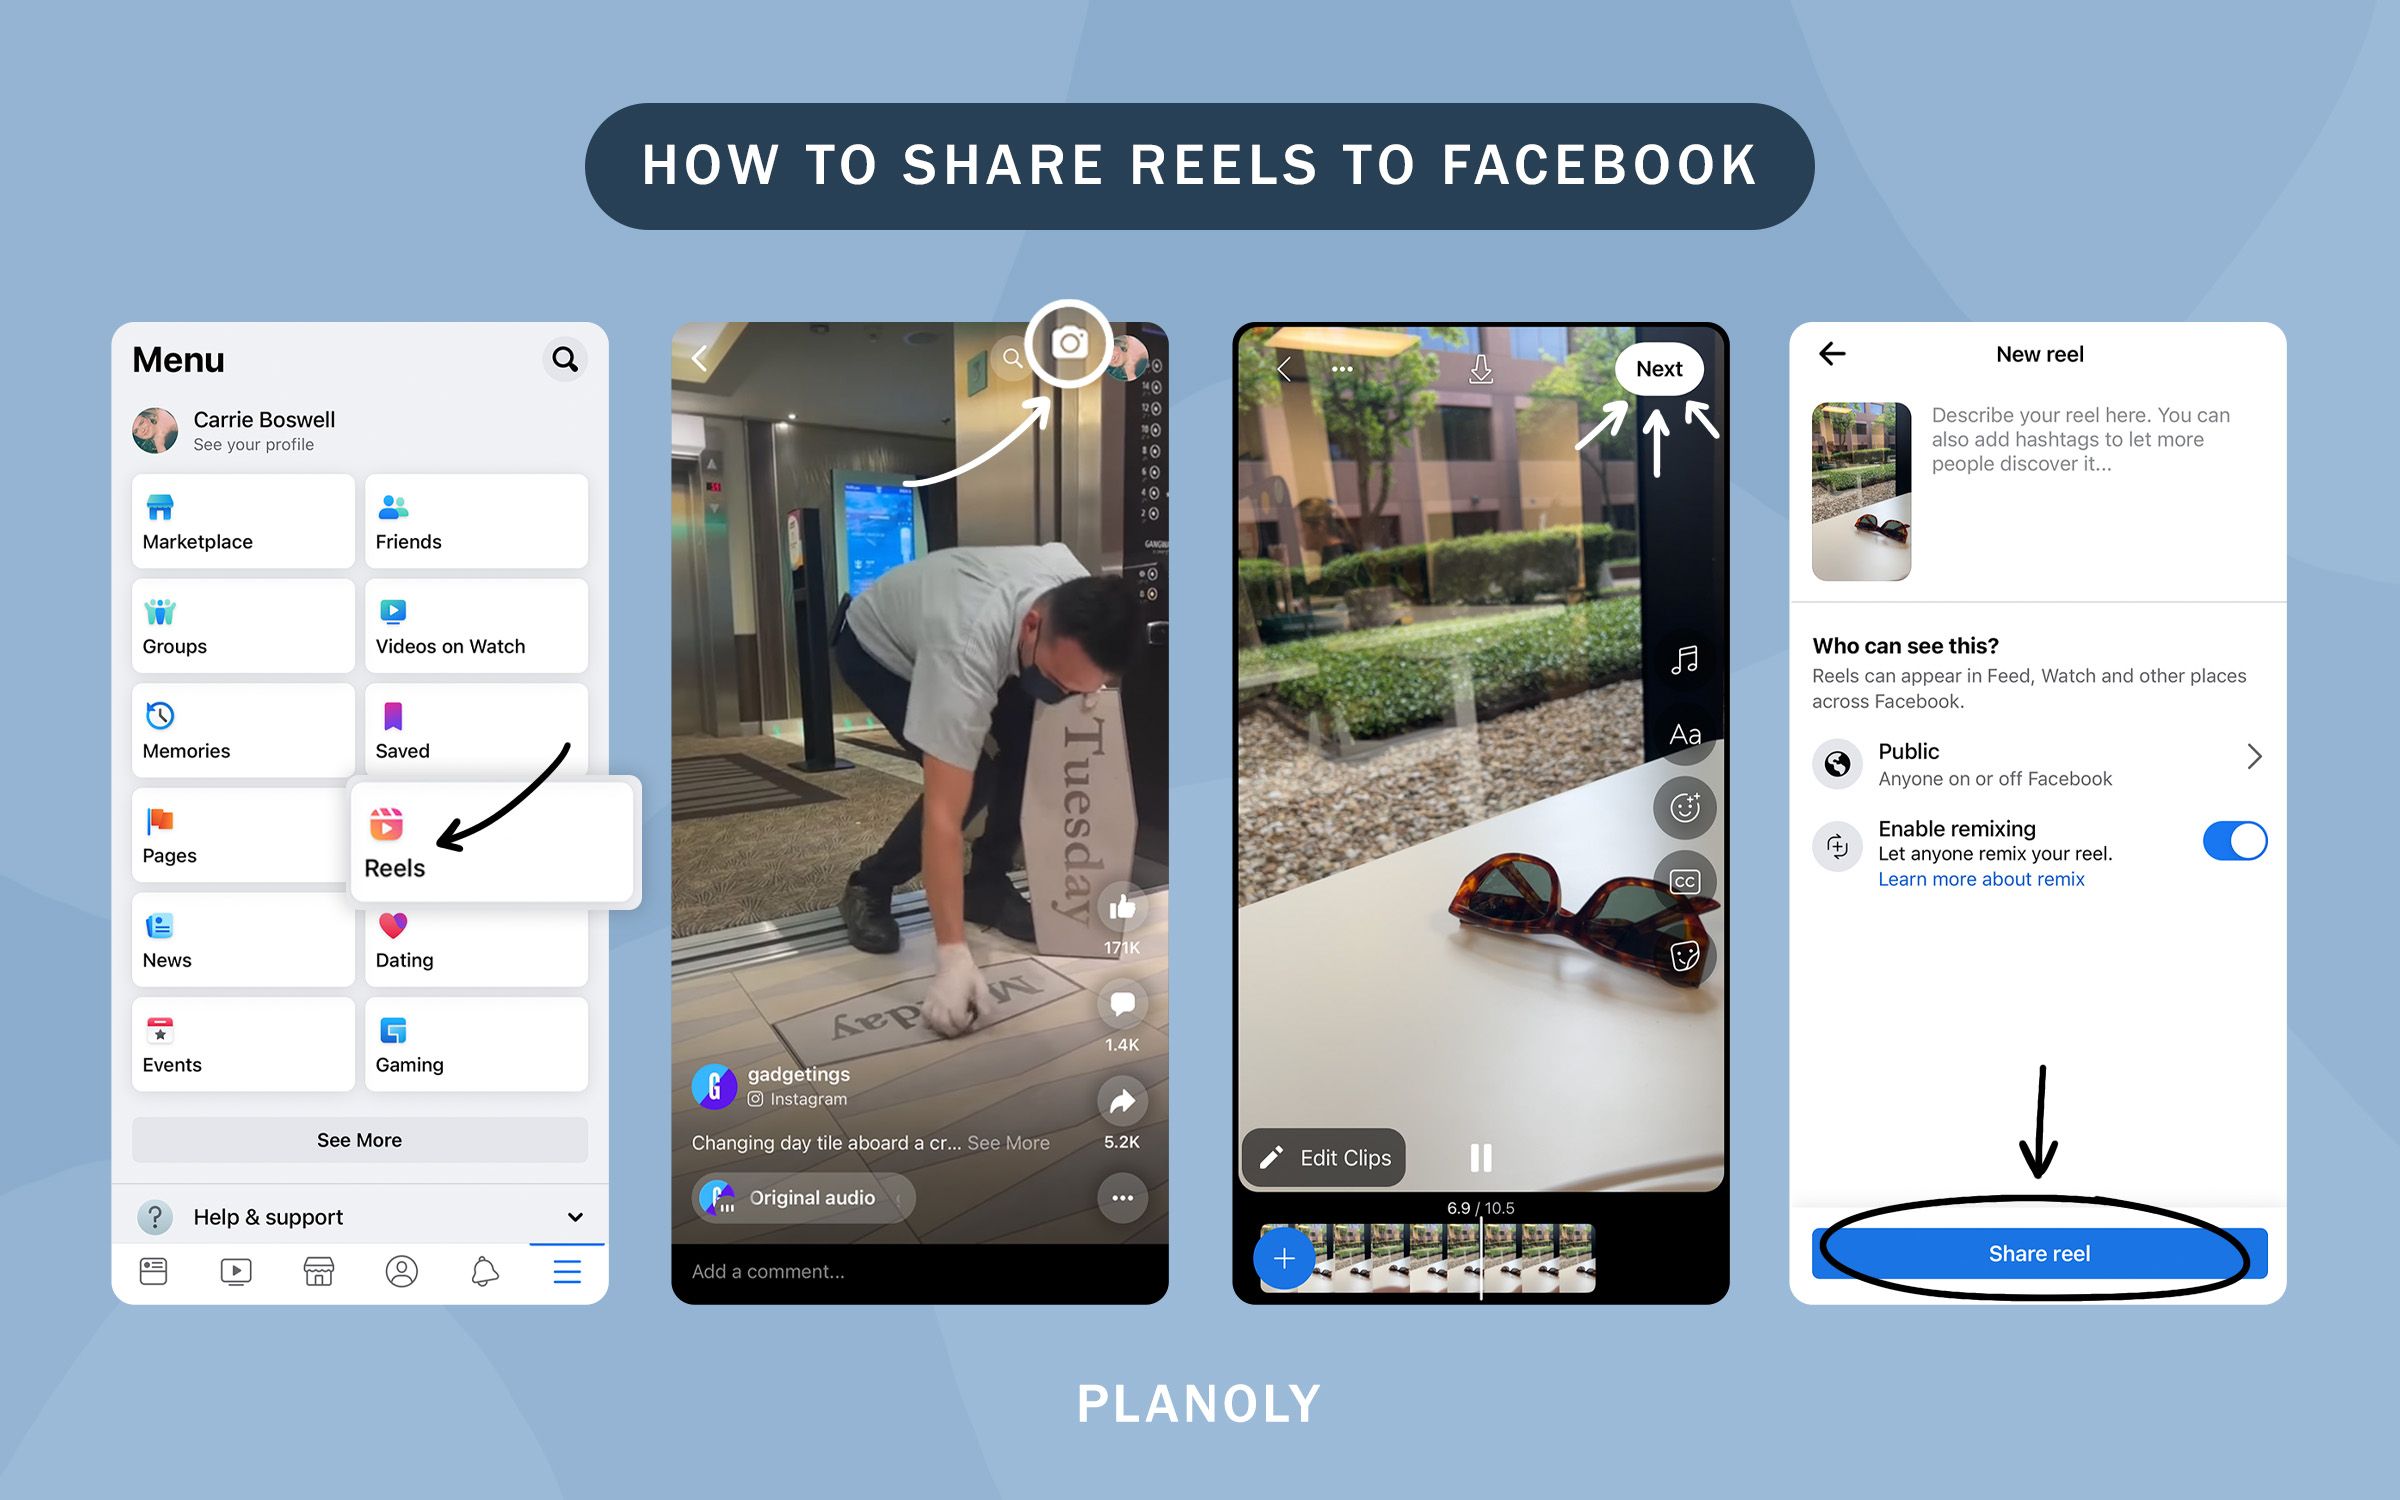 PLANOLY - Blog - What Facebook Reels Rolling Out Globally Means for Businesses - Horizontal Image